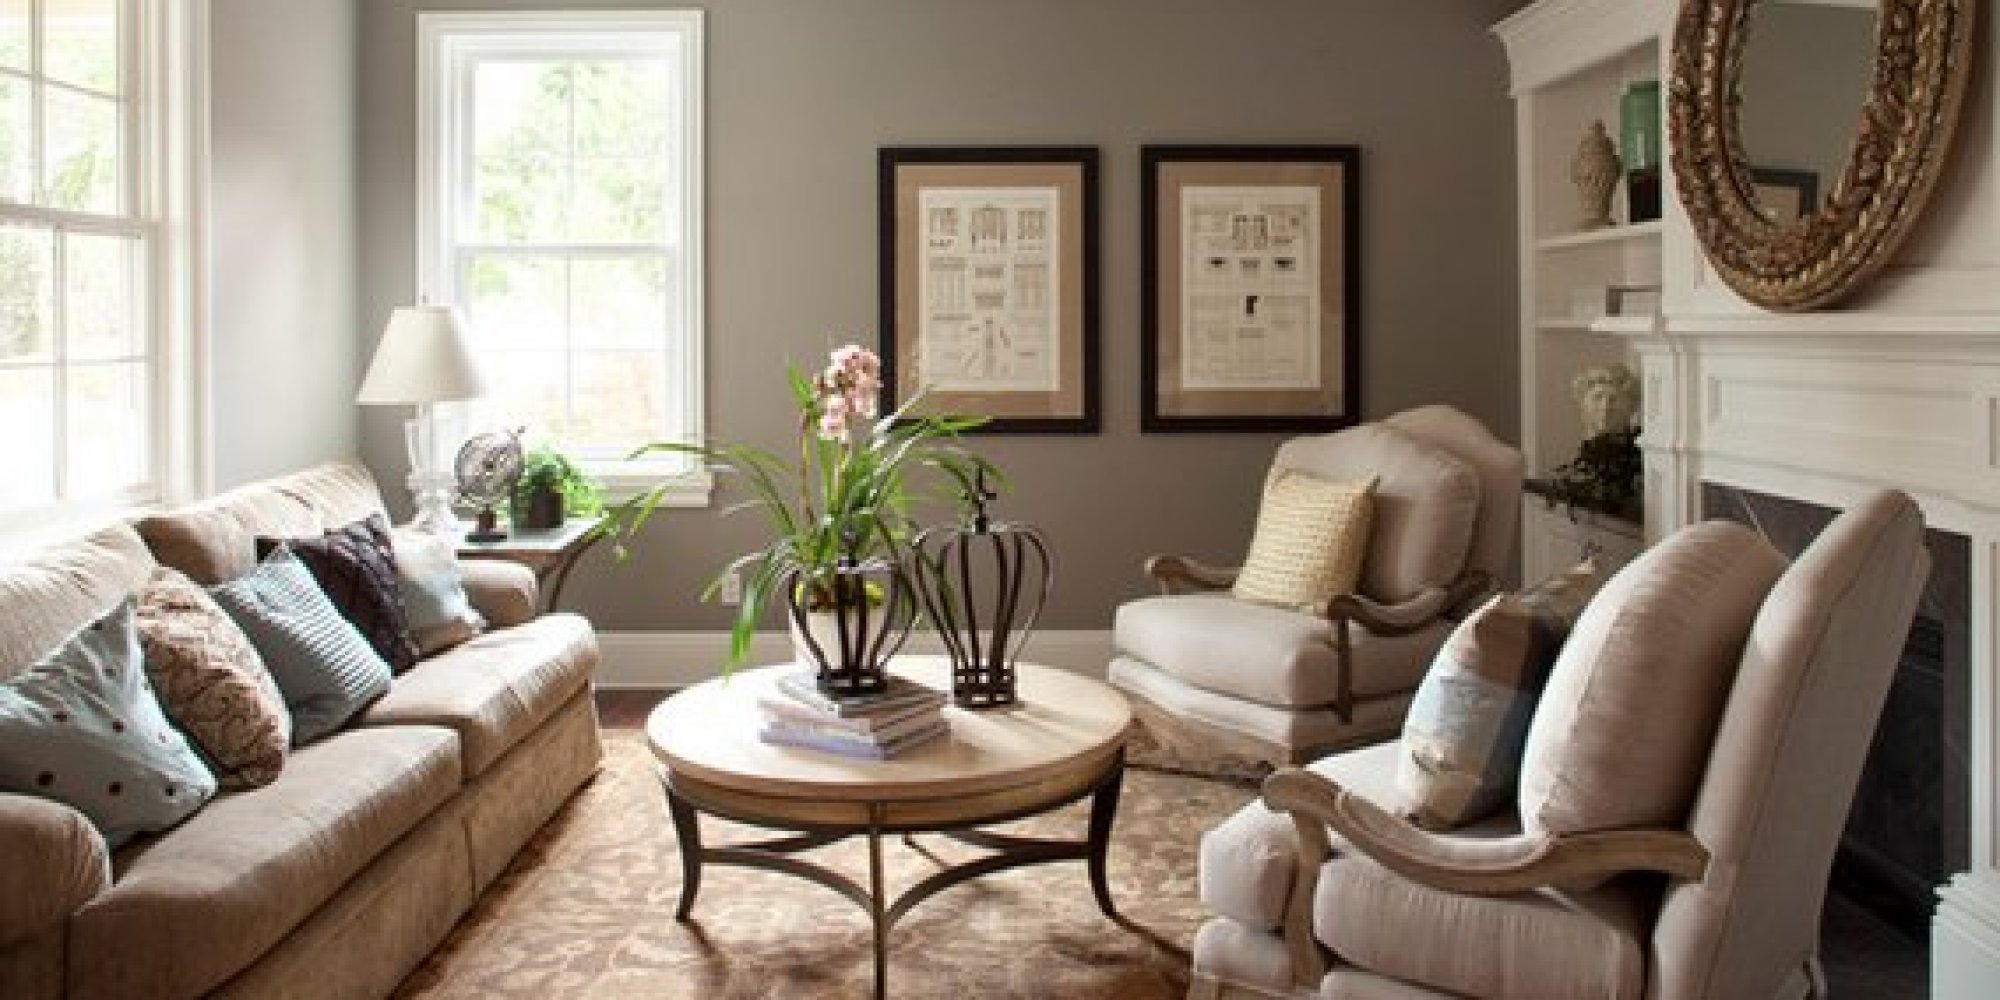 155 best images about Paint Colors for Living Rooms on ...